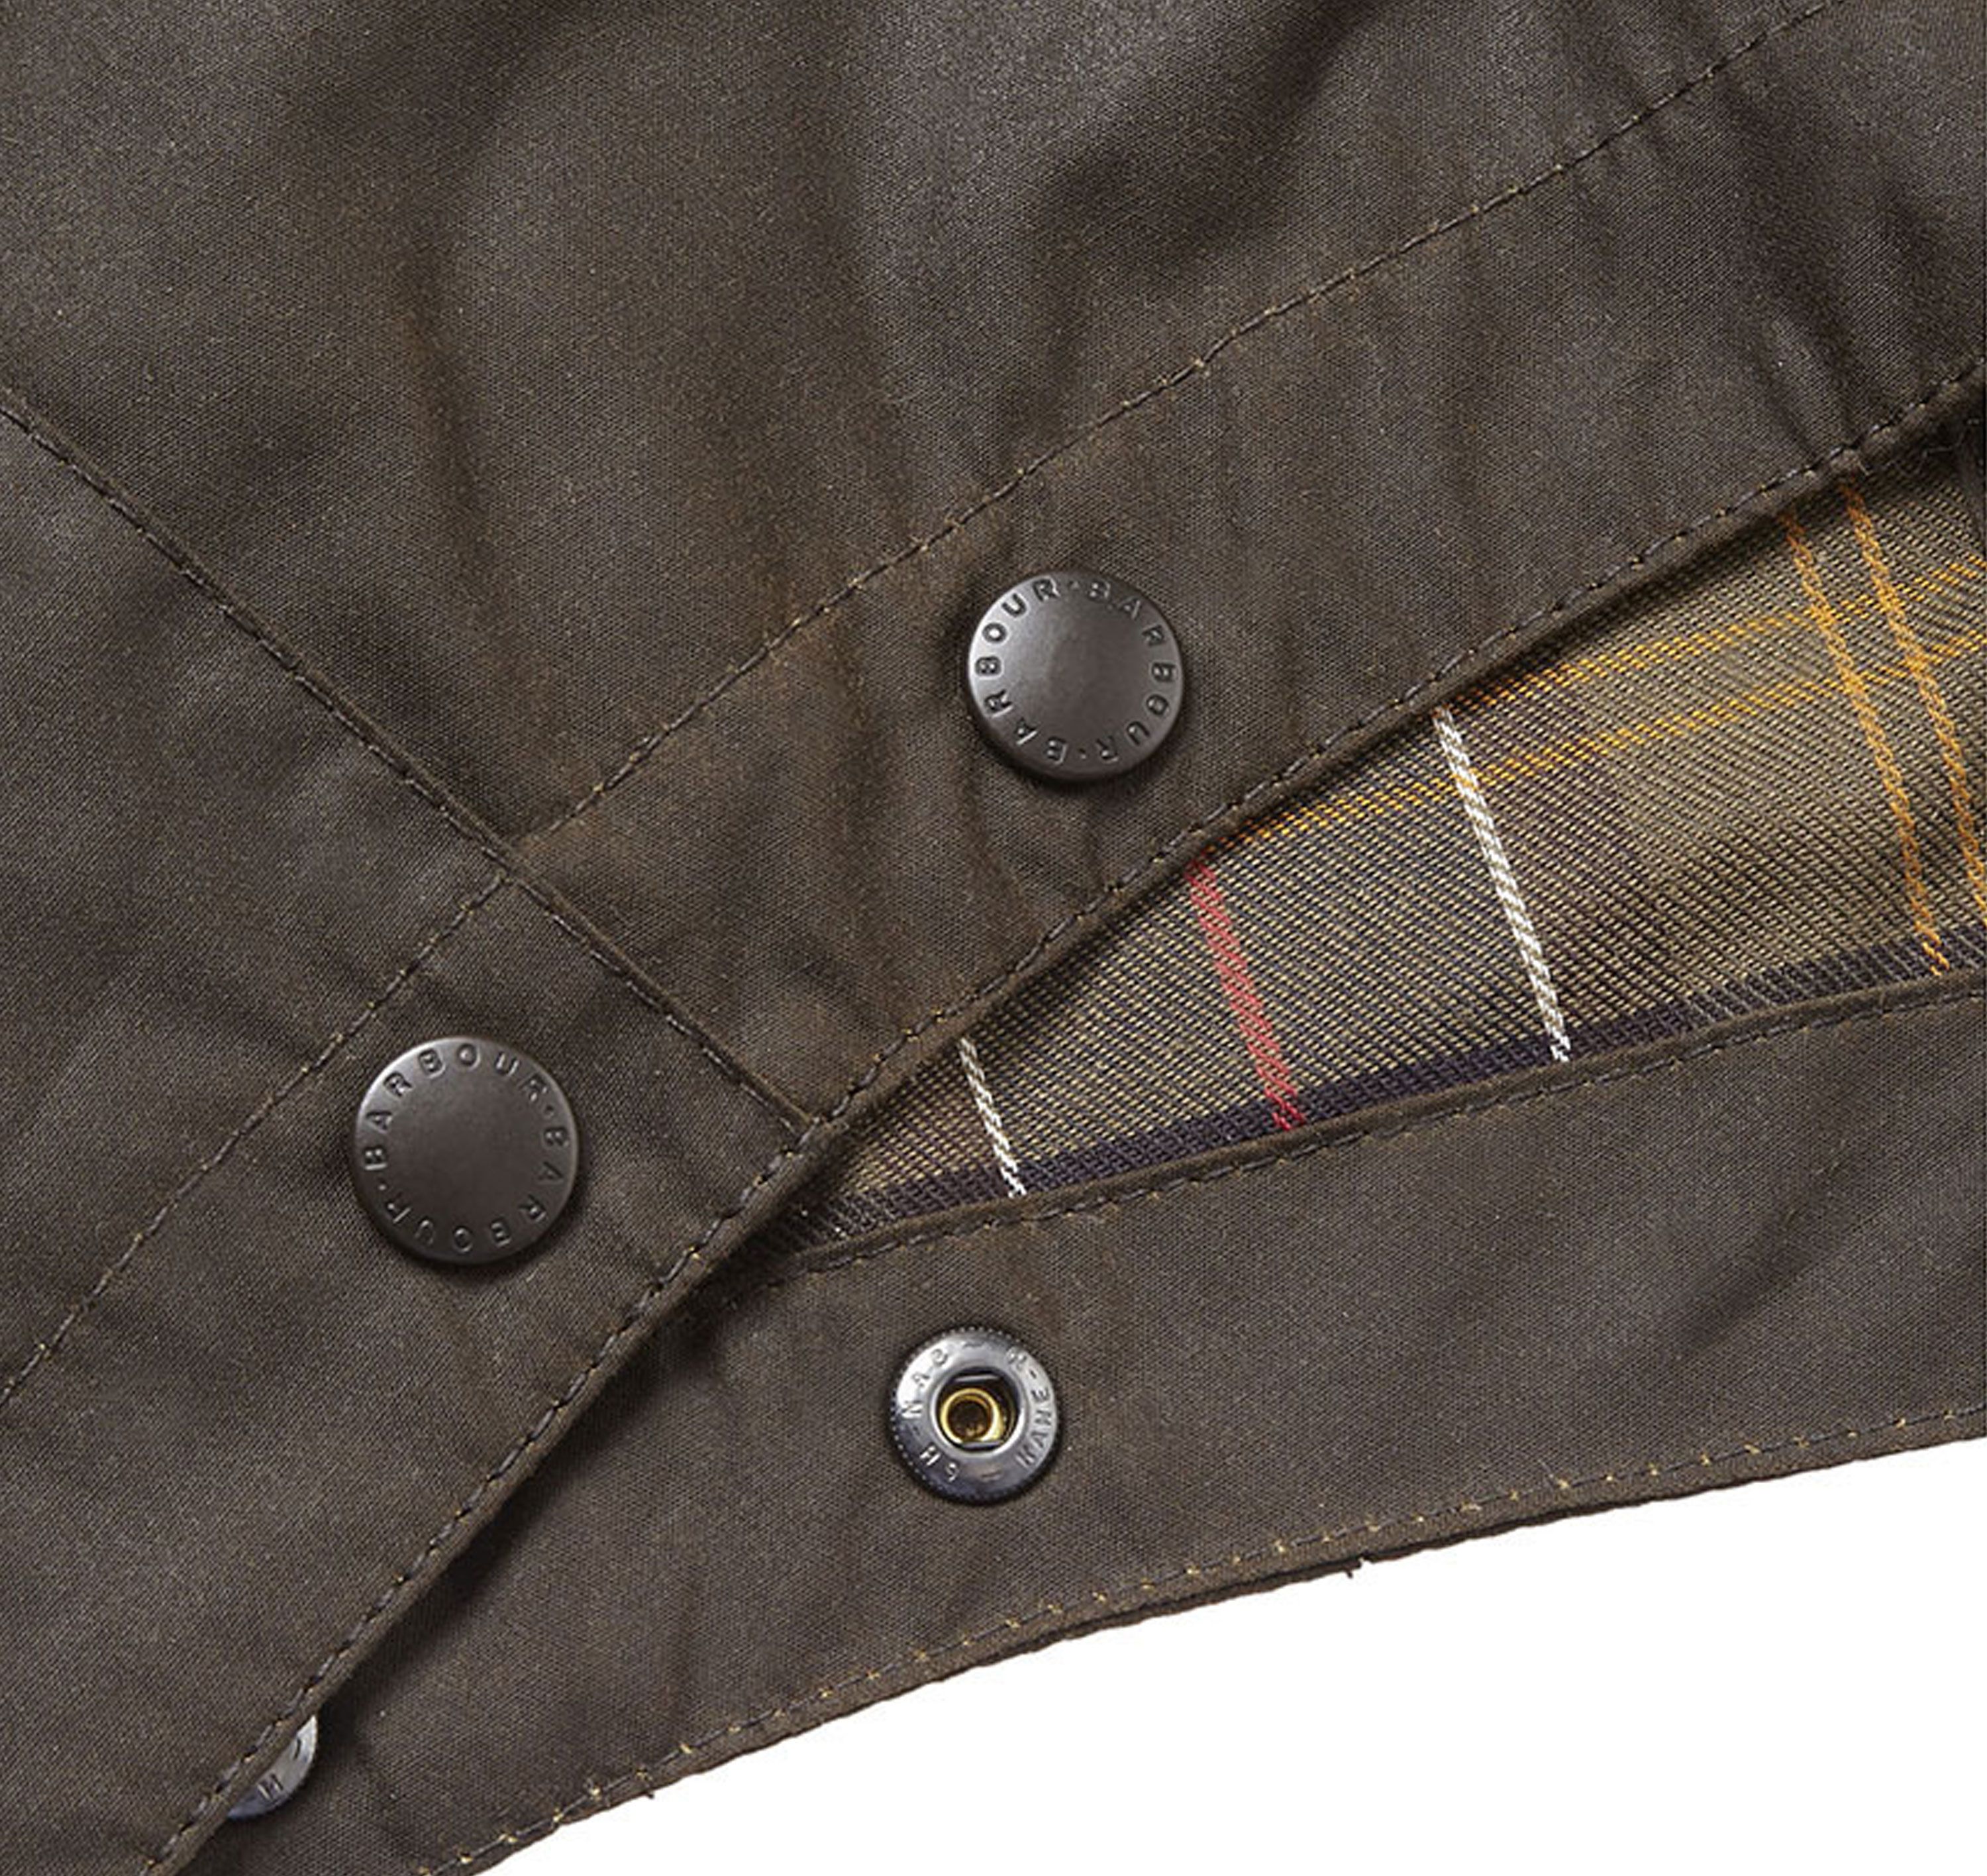 Barbour Olive Classic Sylkoil Hood